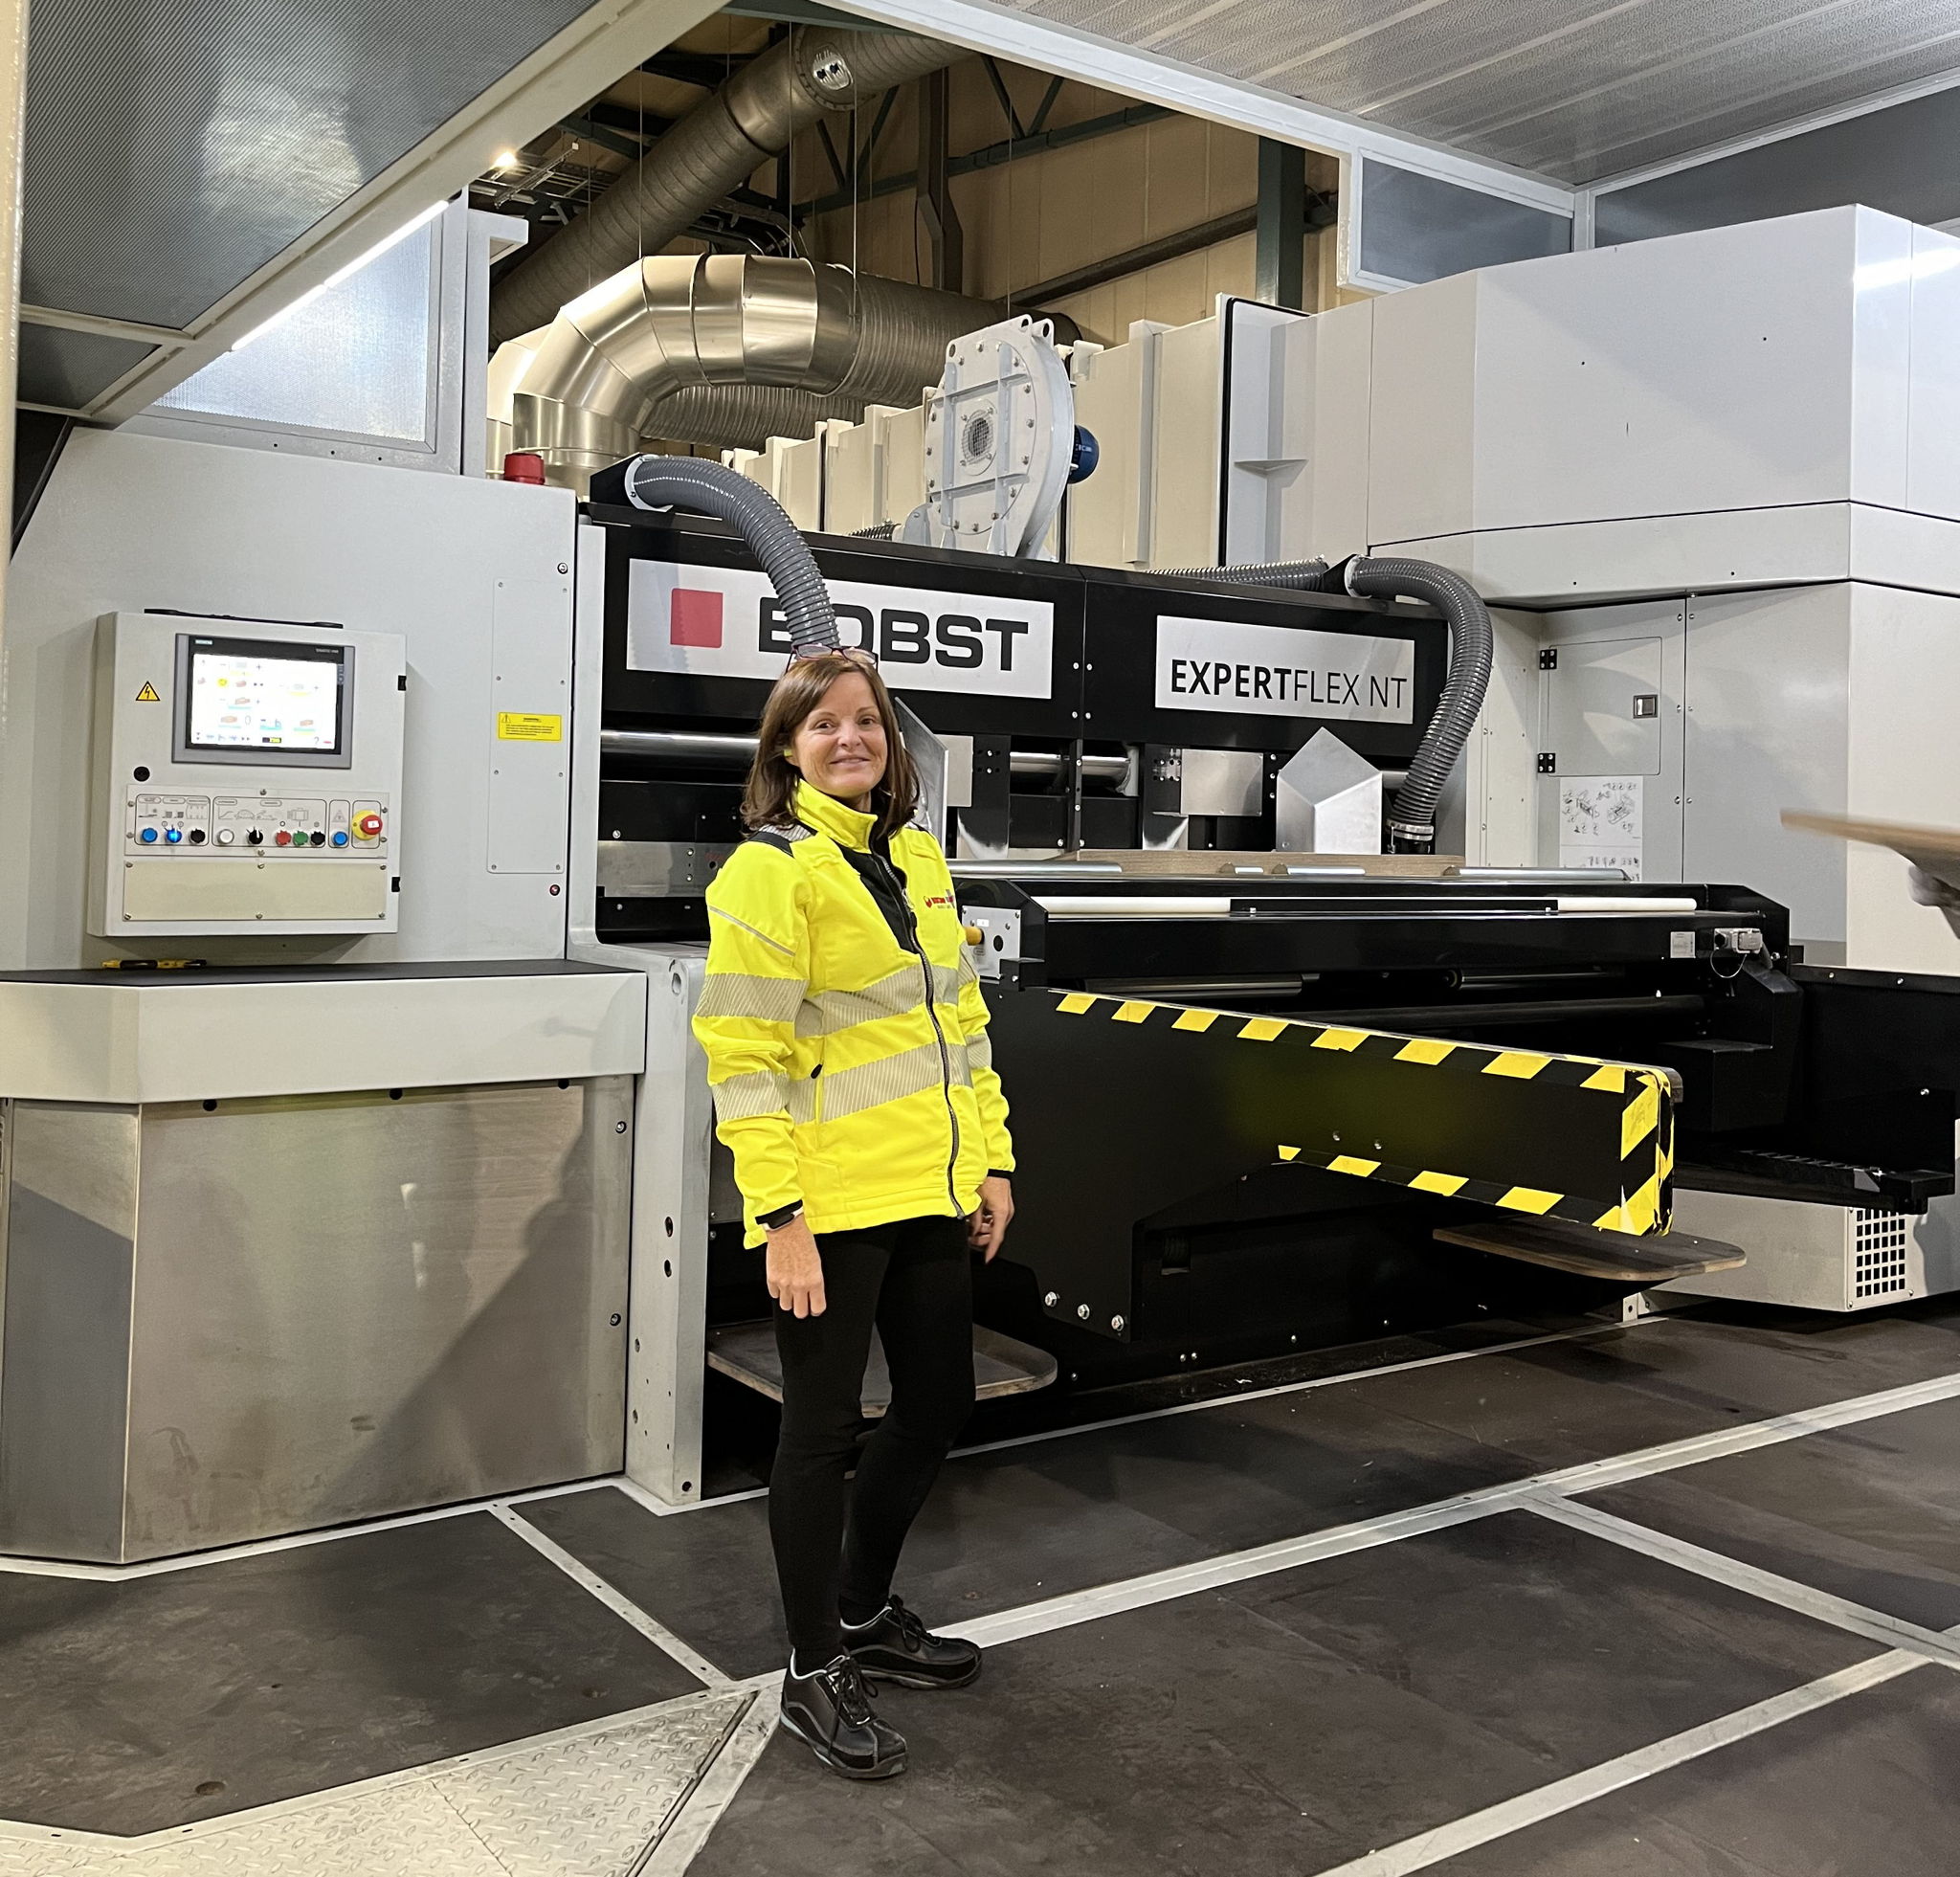 Jennifer Riddell, Managing Director with their recent investment BOBST EXPERTFLEX NT